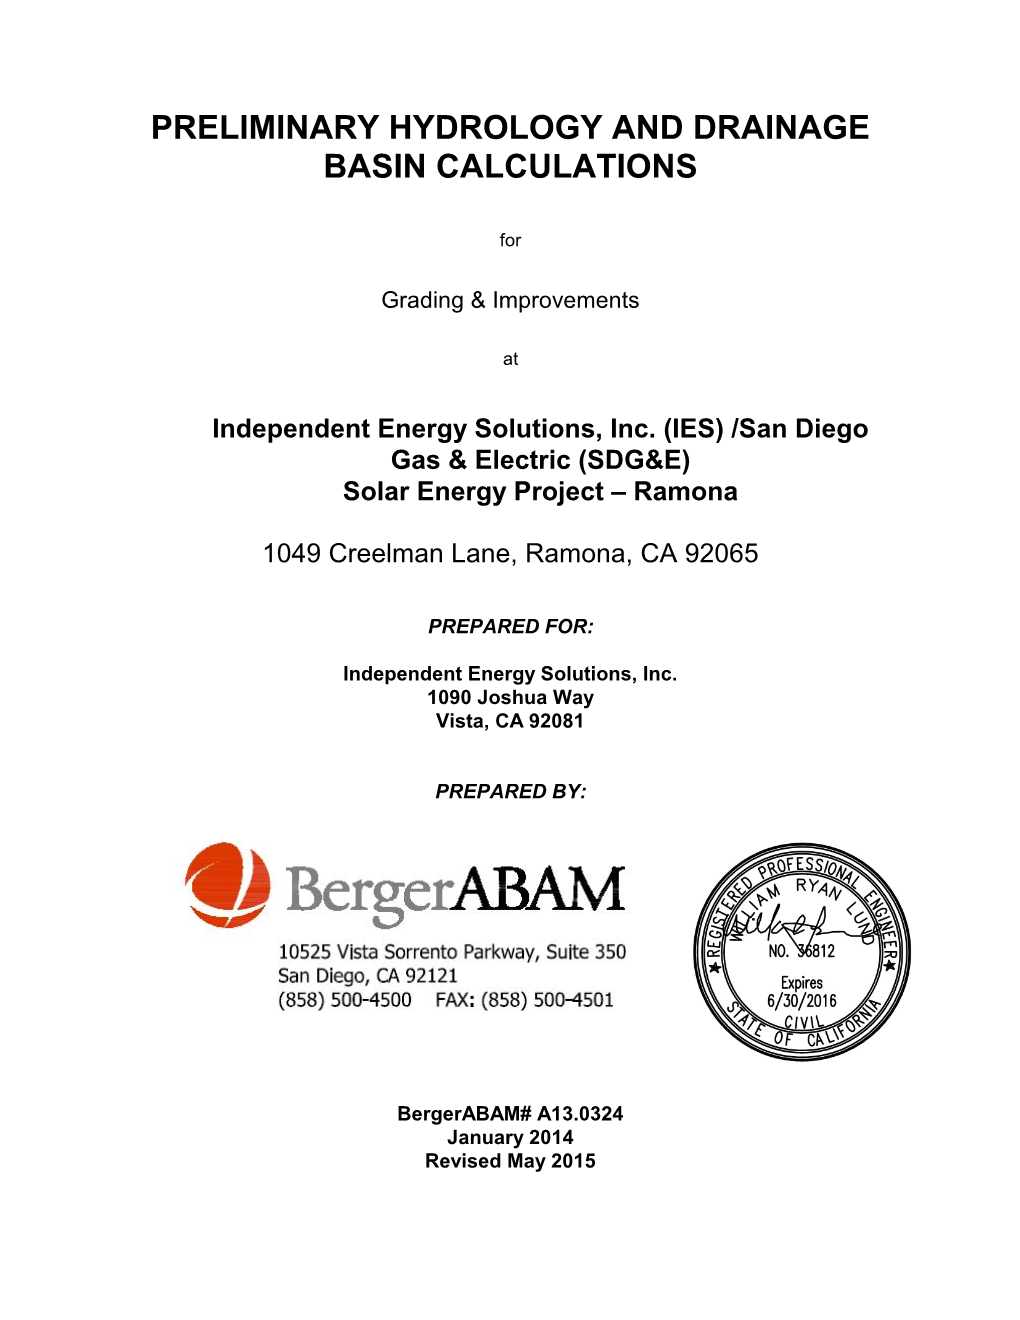 Preliminary Hydrology and Drainage Basin Calculations